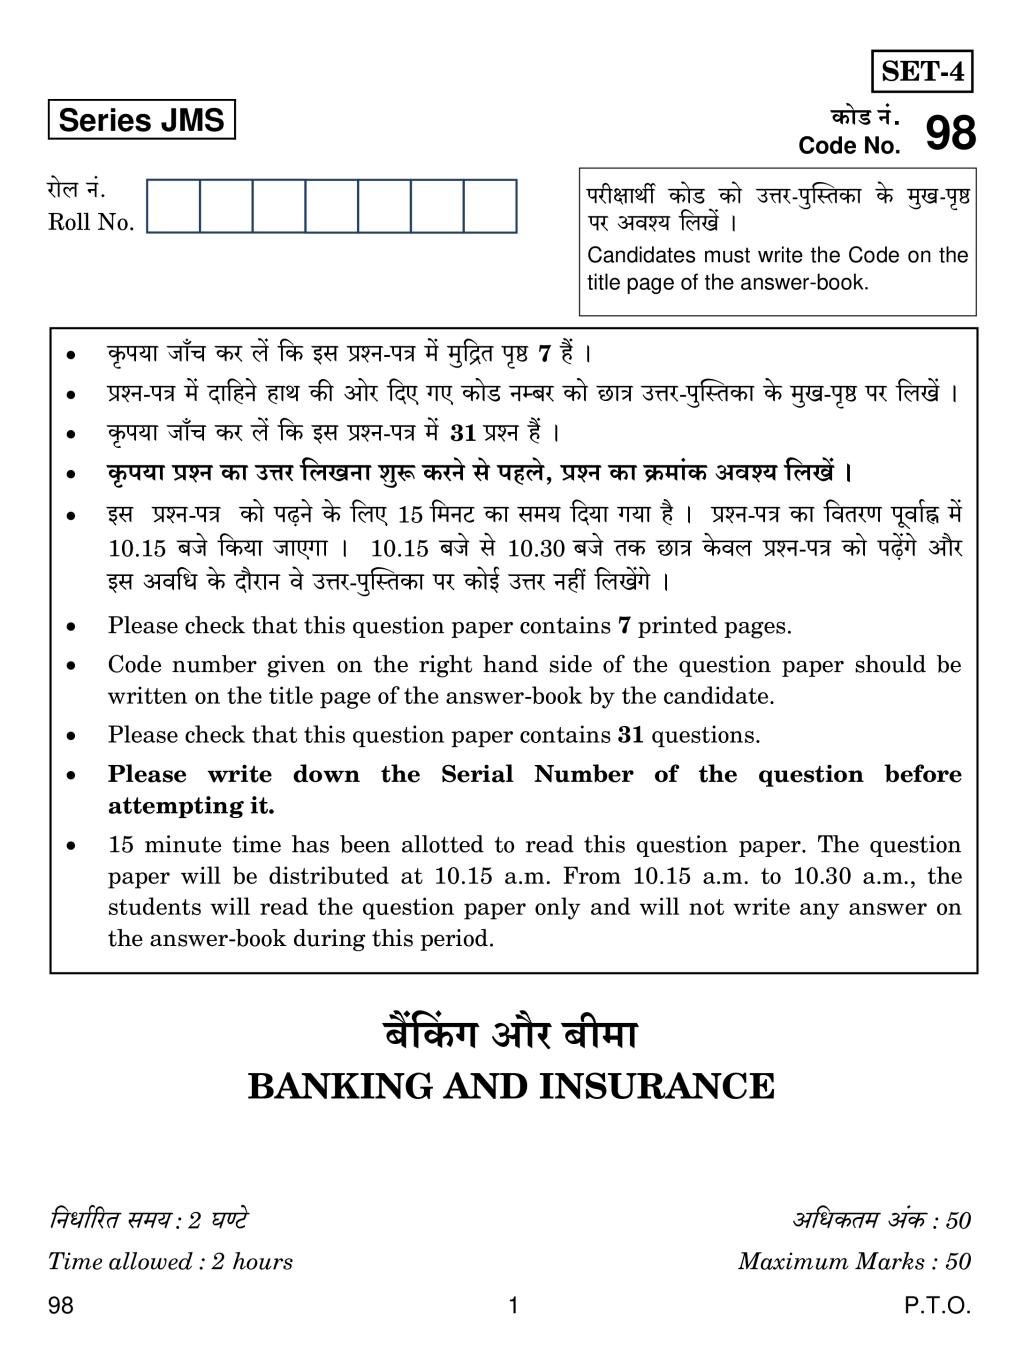 CBSE Class 10 Banking and Insurance Question Paper 2019 - Page 1